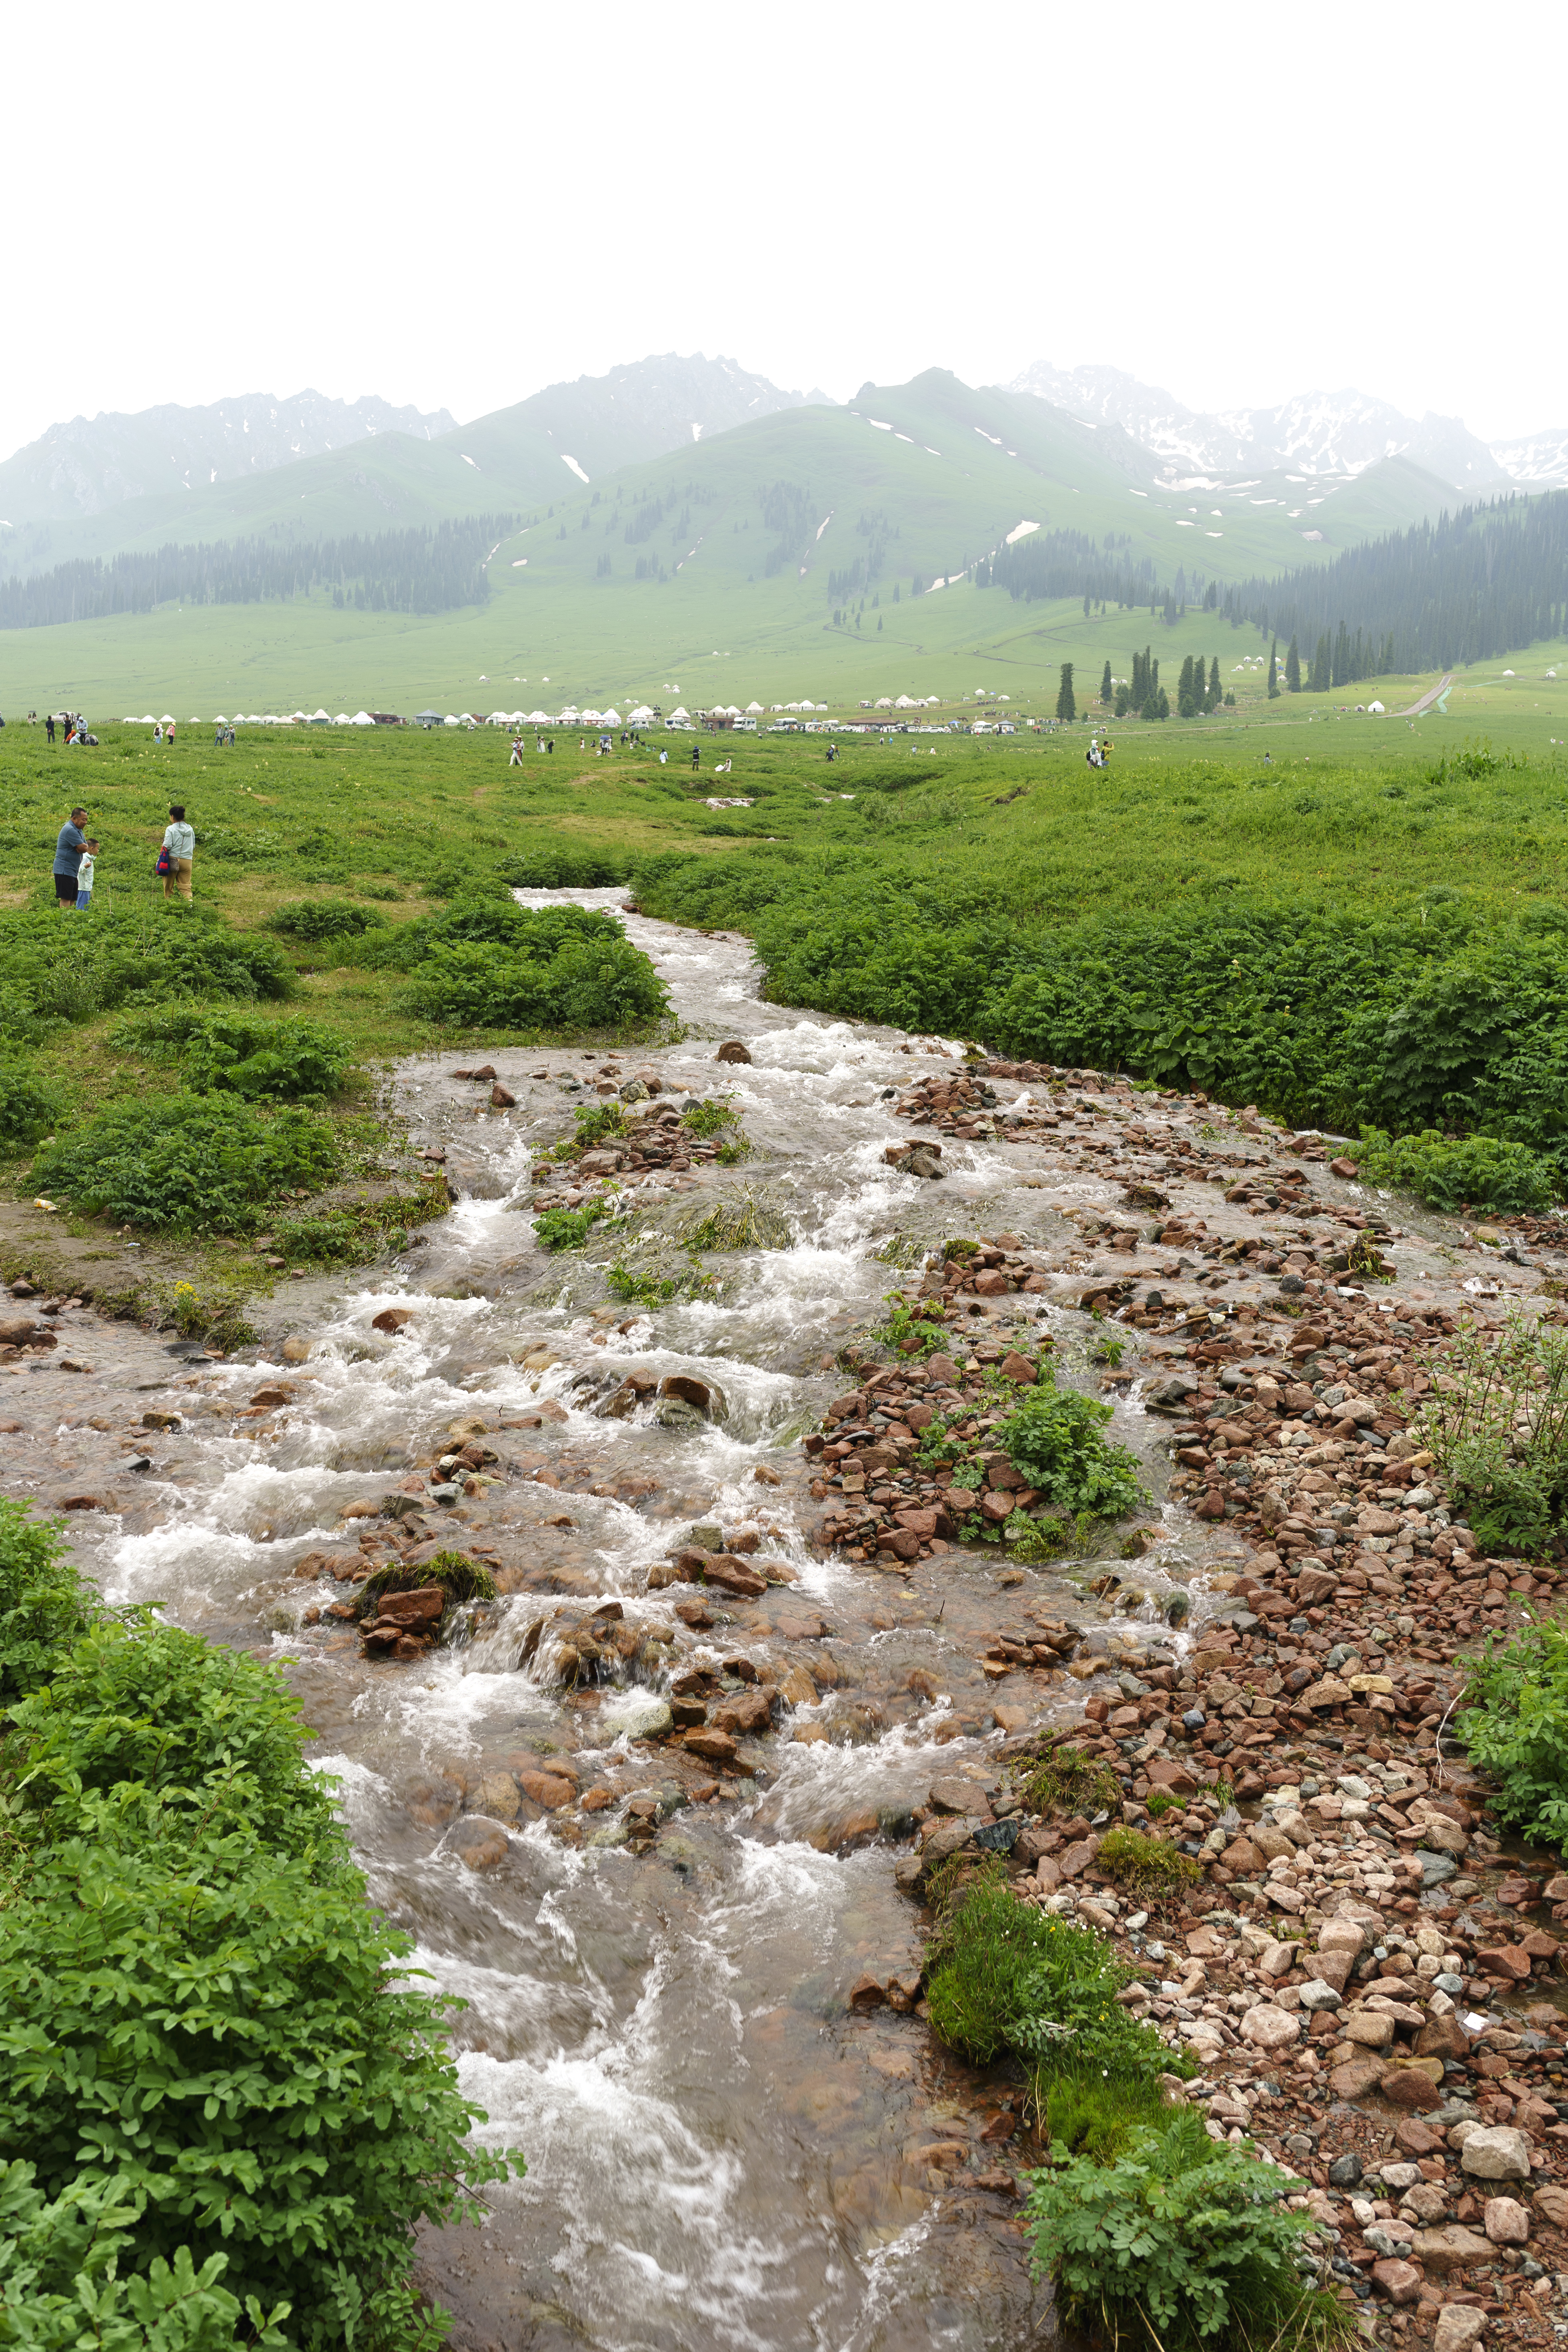 General 3921x5881 landscape creeks grass China Xinjiang mountains portrait display water nature trees snow rocks